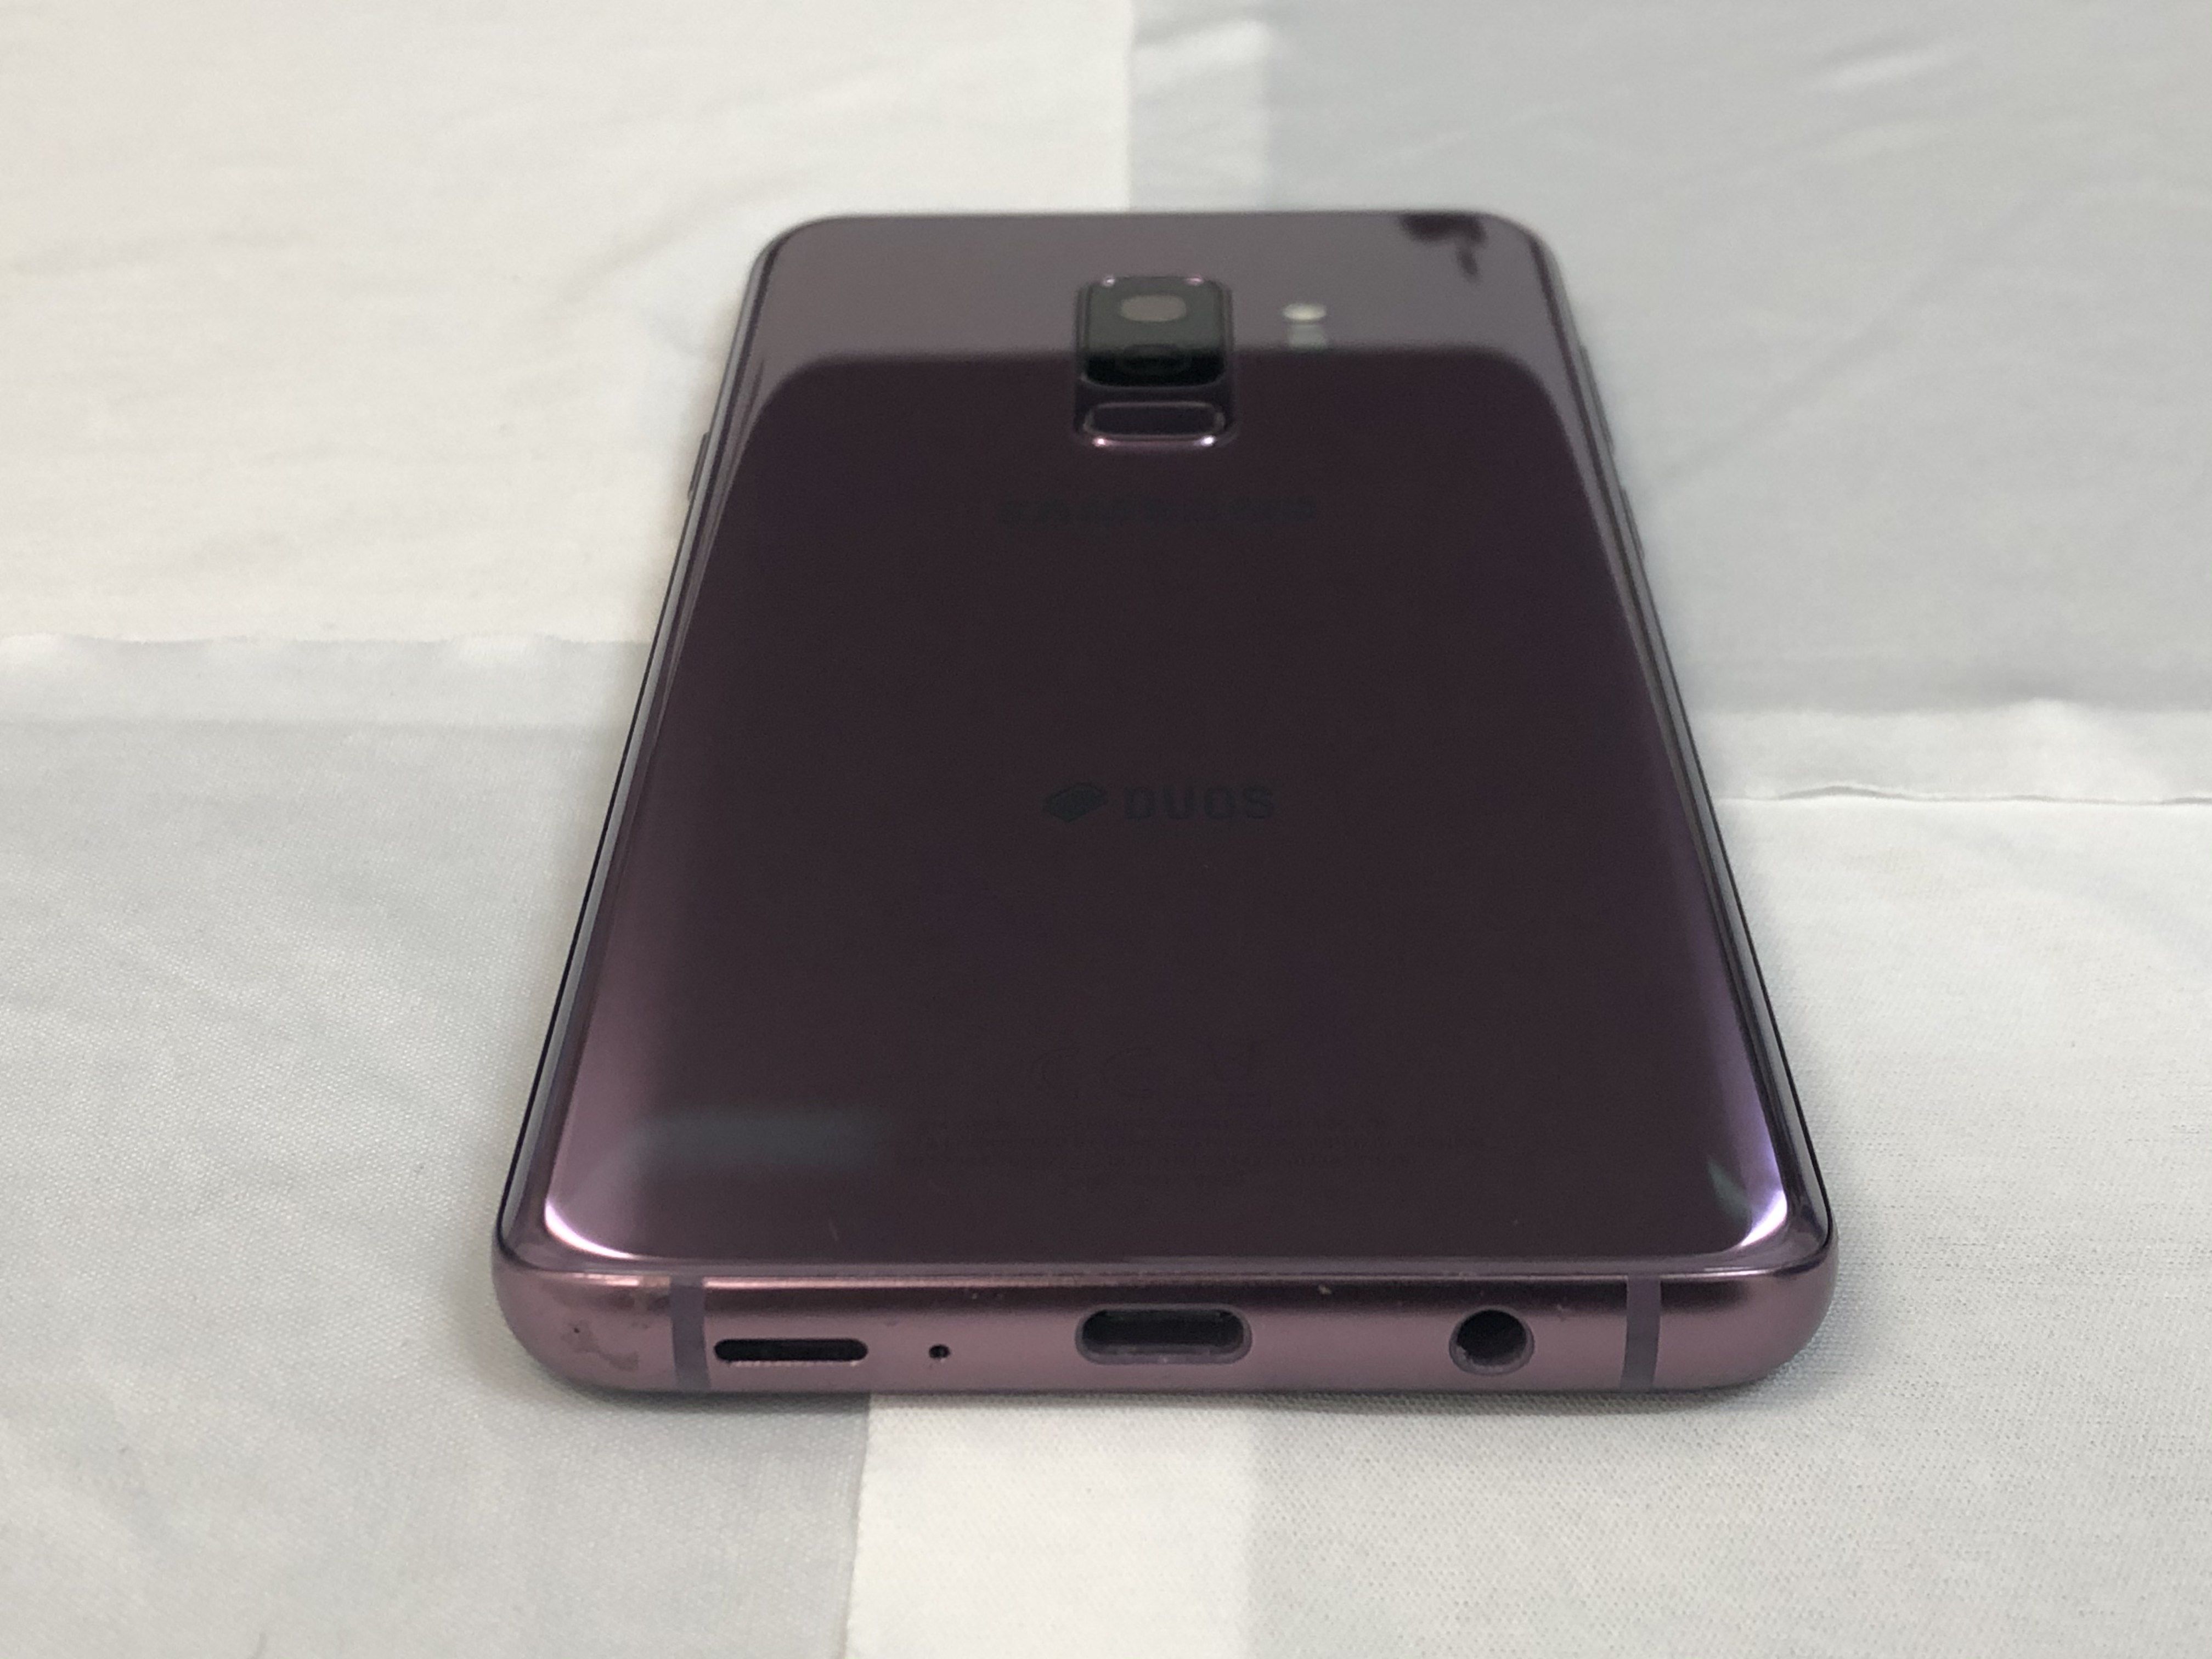 Samsung Galaxy S9+ 128GB || Purple || *UNLOCKED* for AT&T / Cricket / T-Mobile / MetroPCS / Simple Mobile / Sprint / Verizon / others WORLDWIDE